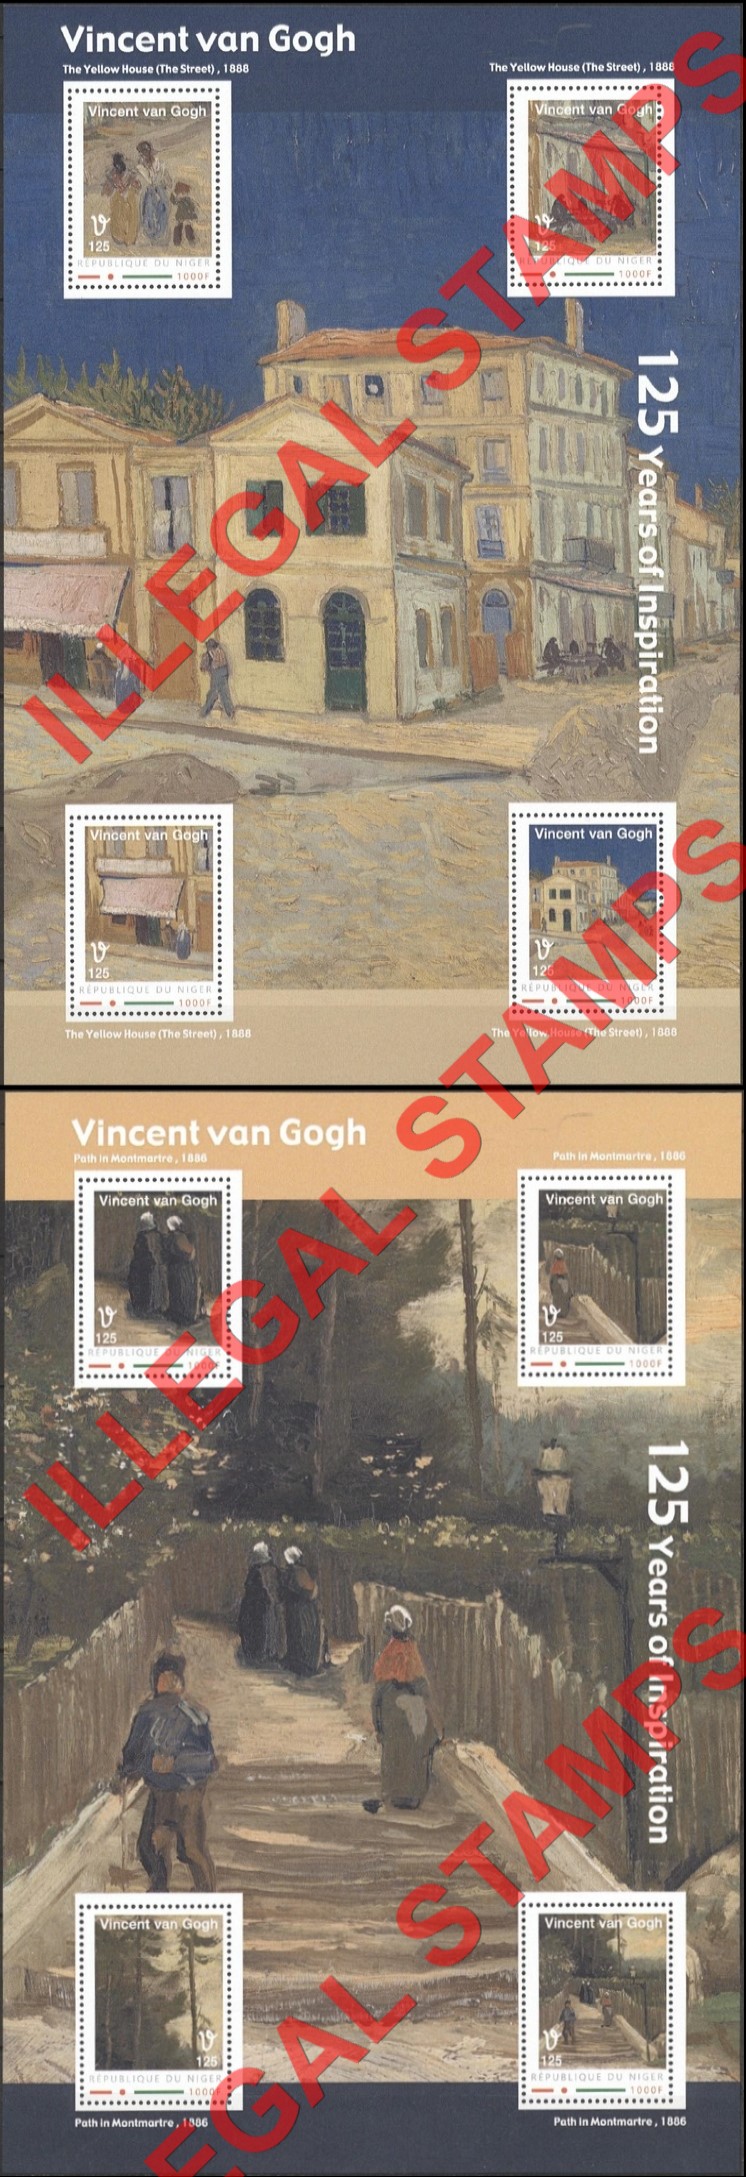 Niger 2012 Paintings by Vincent Van Gogh Illegal Stamp Souvenir Sheets of 4 (Part 3)